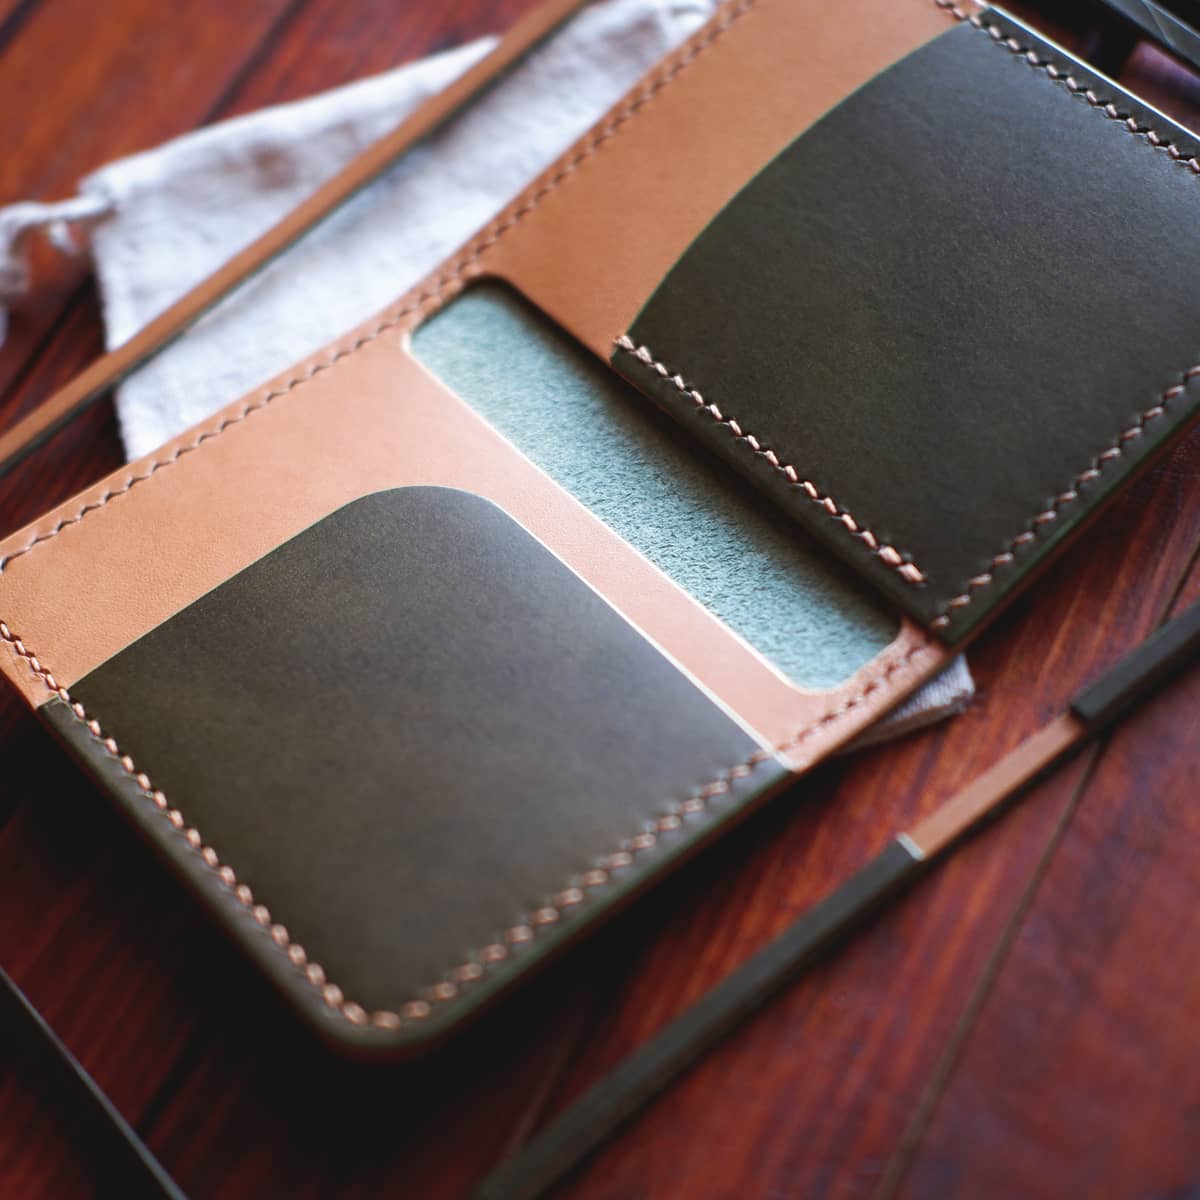 Interior of The Mountain Bifold wallet in Buttero full grain vegetable tanned leather